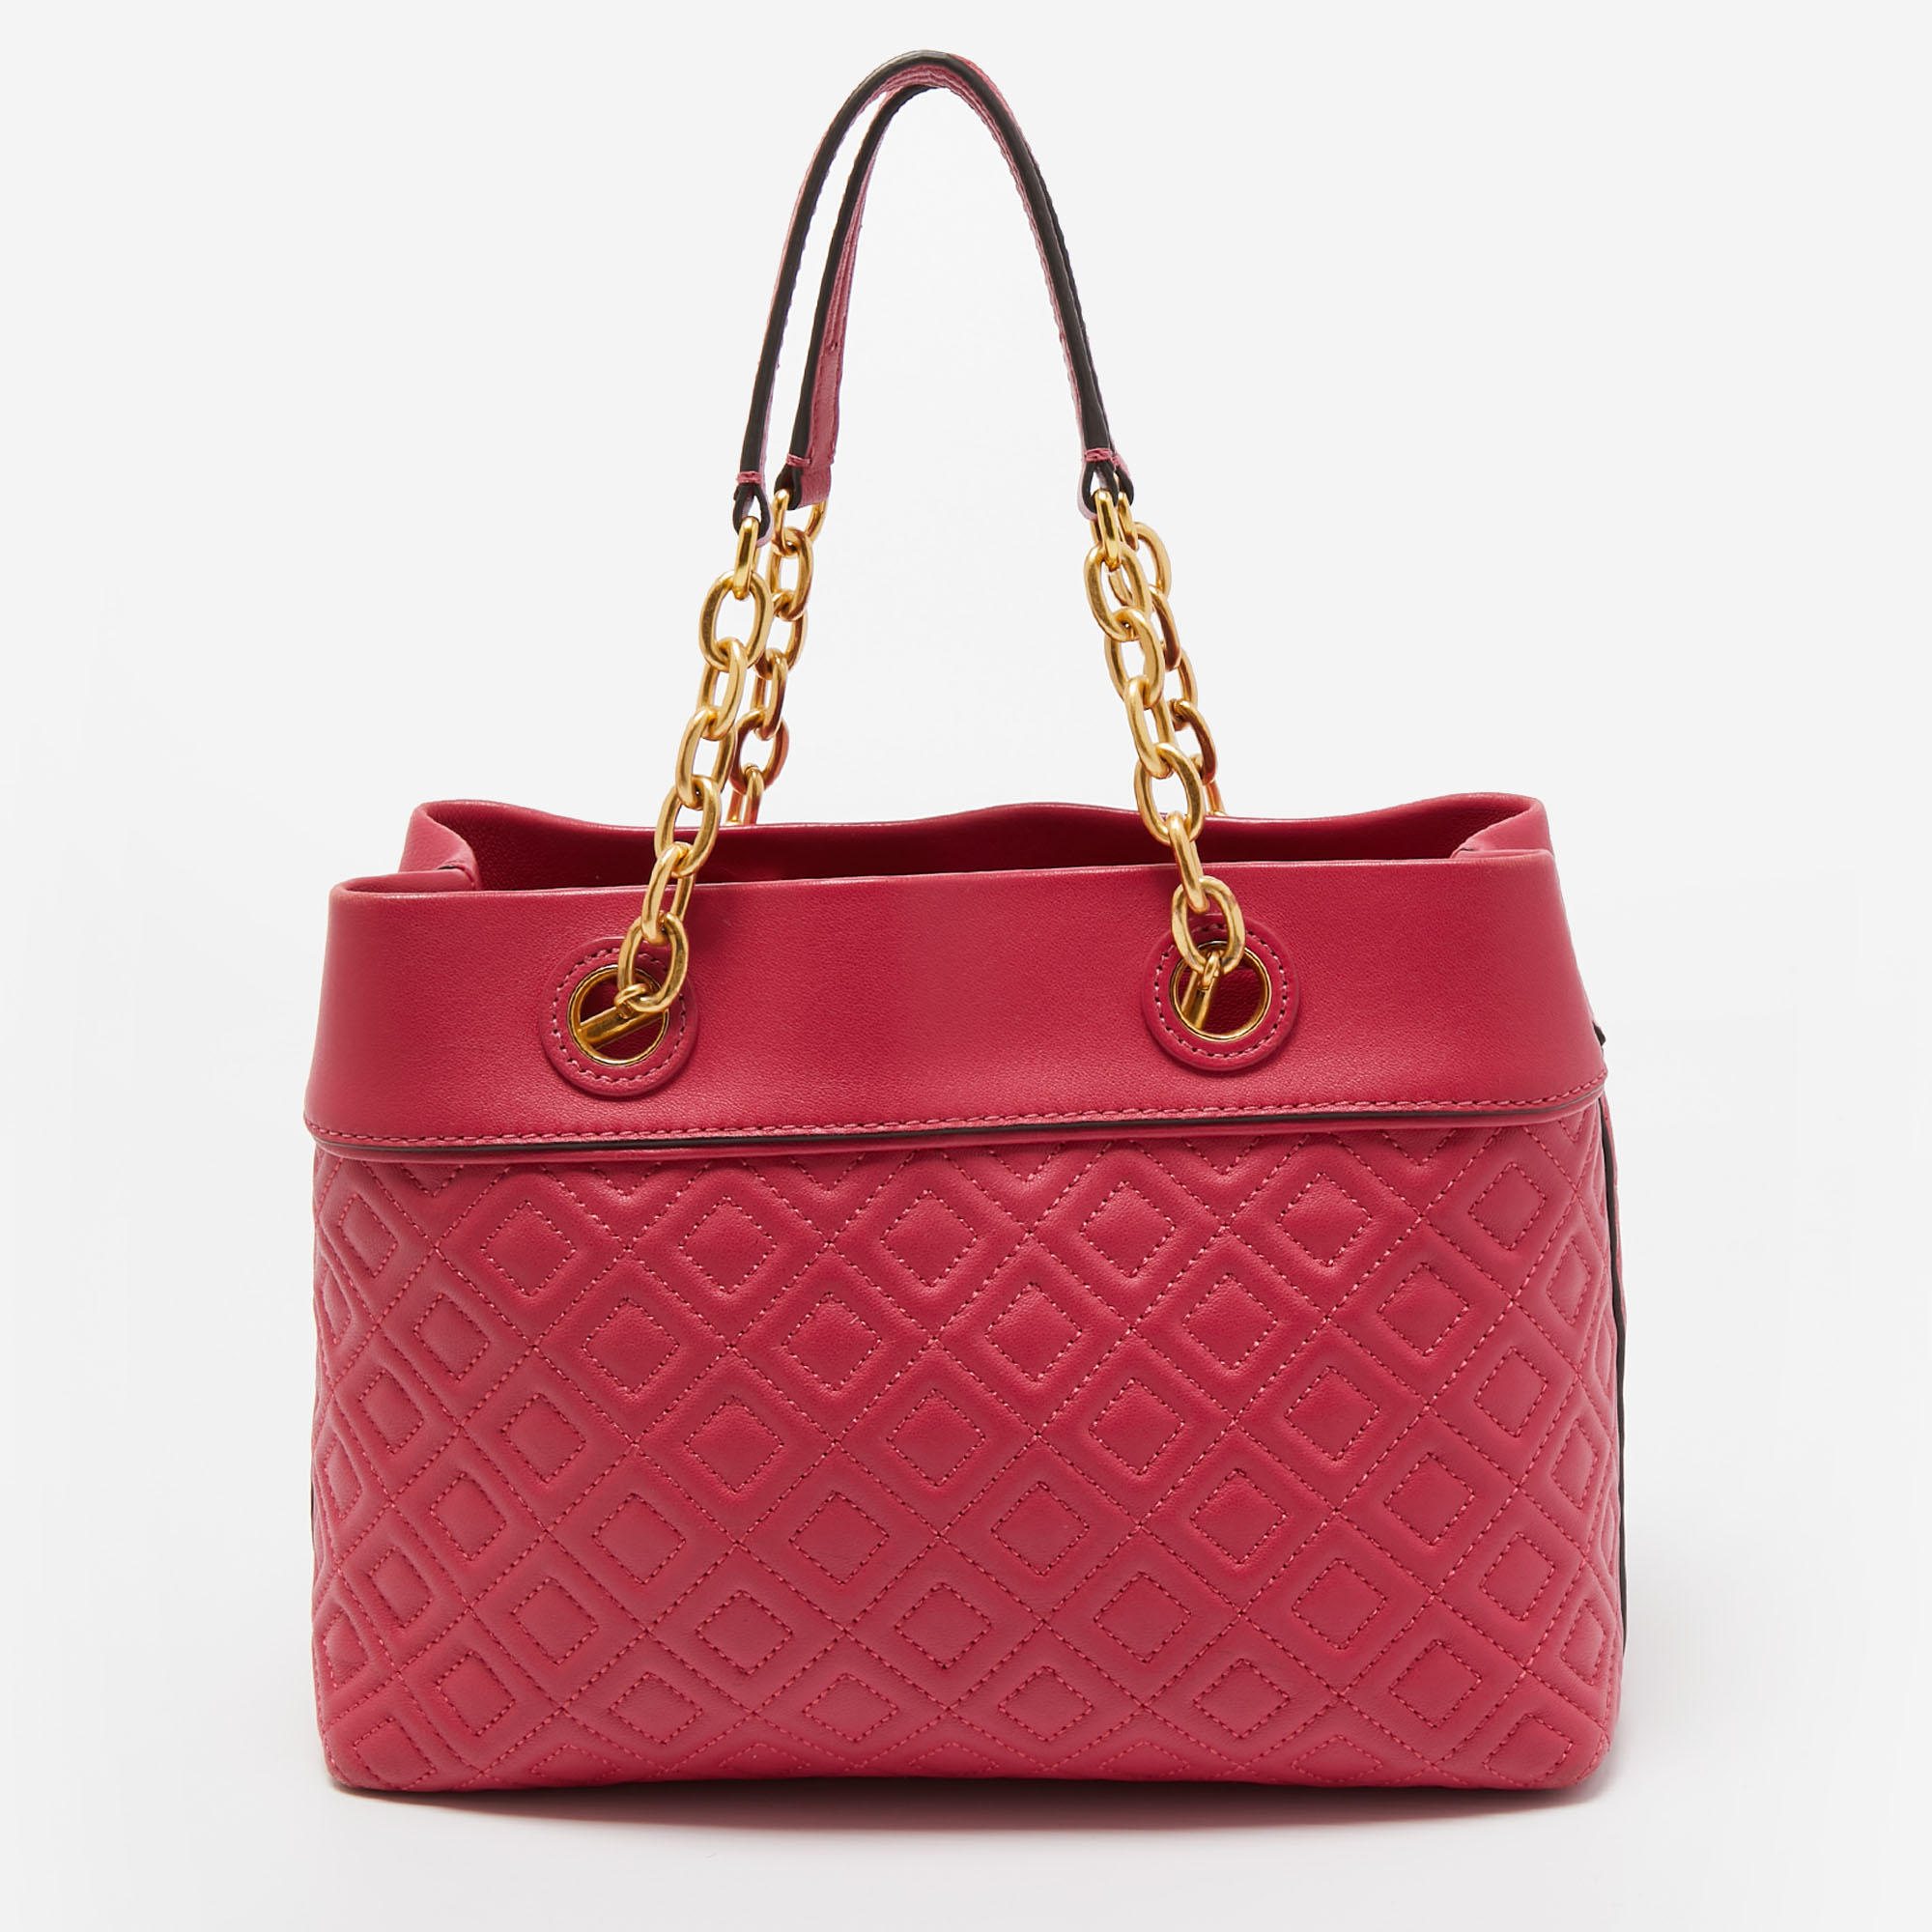 Tory Burch Dark Pink Quilted Leather Fleming Tote